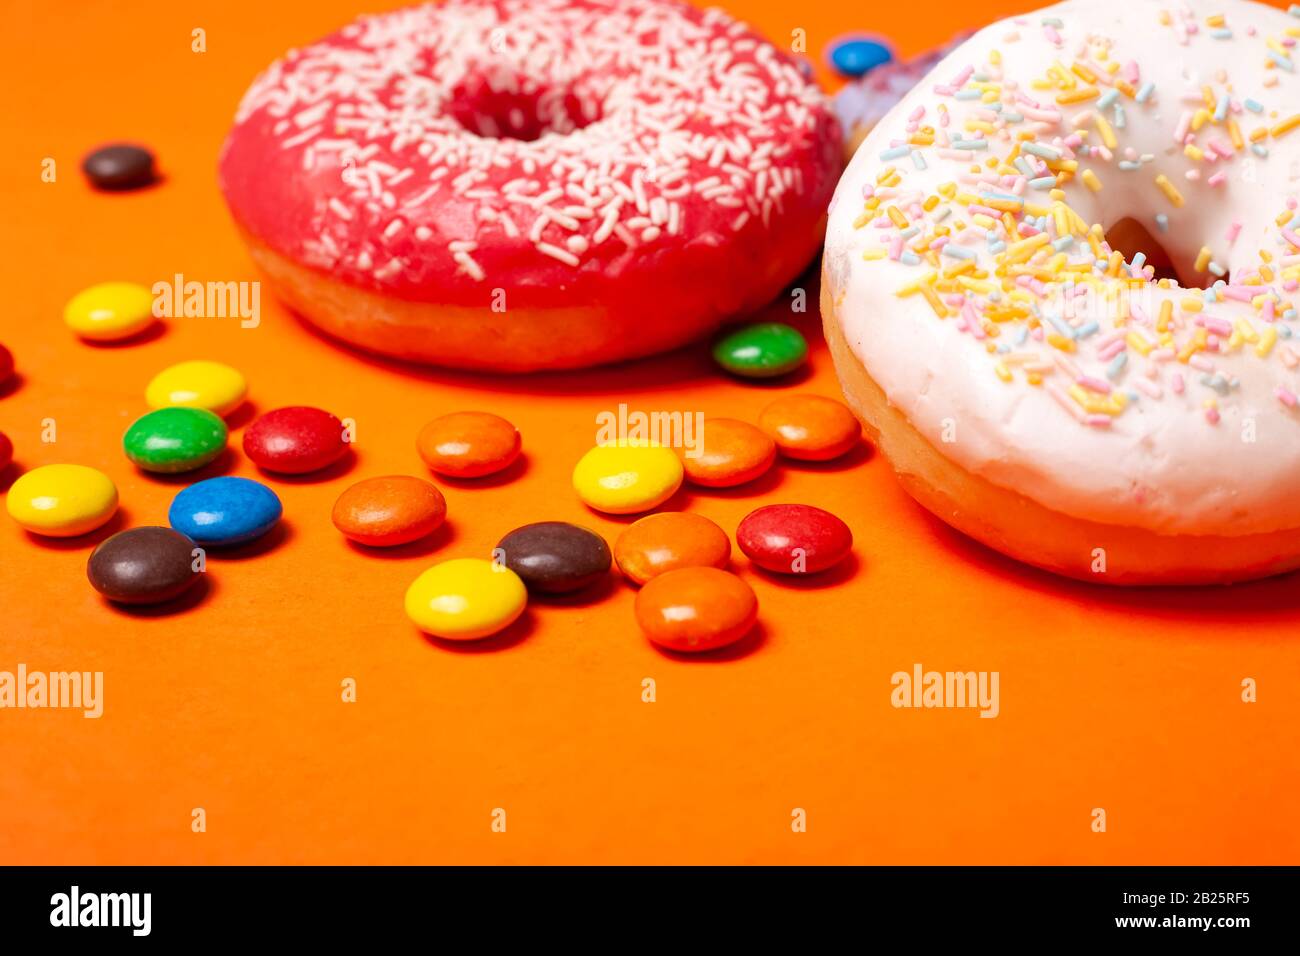 glazed red and white round bun donuts and multi-colored sweets on orange background. children's snacks. Stock Photo